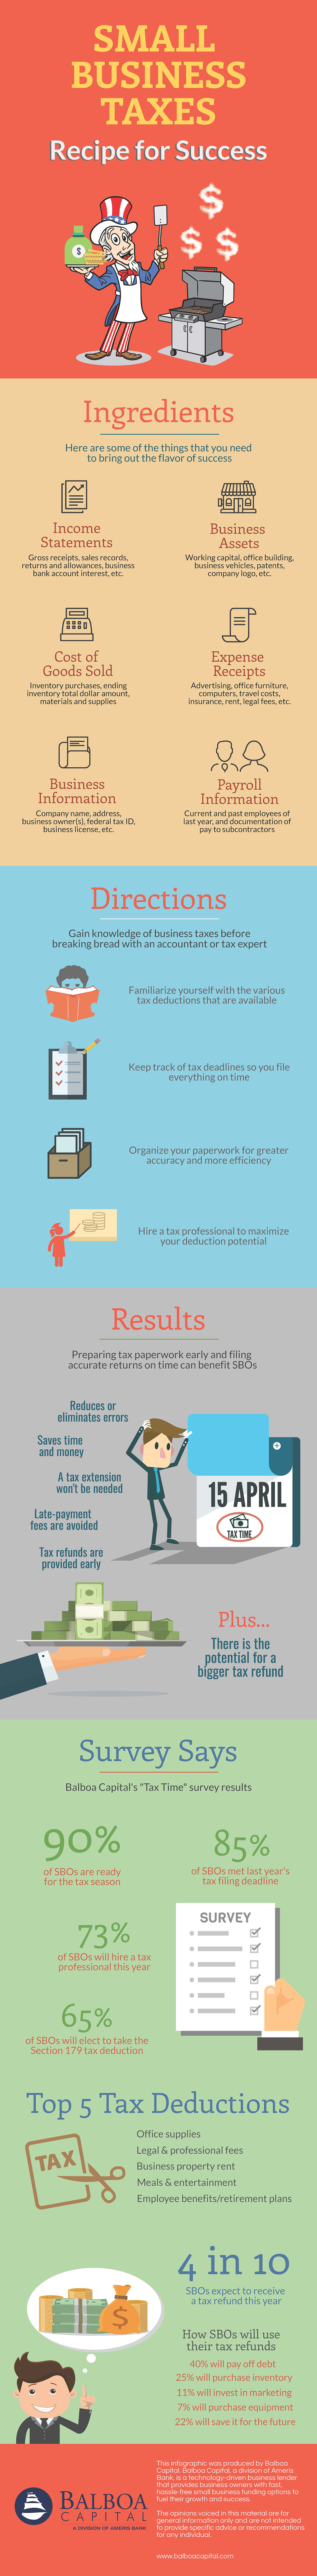 Small Business Tax Tips Infographic